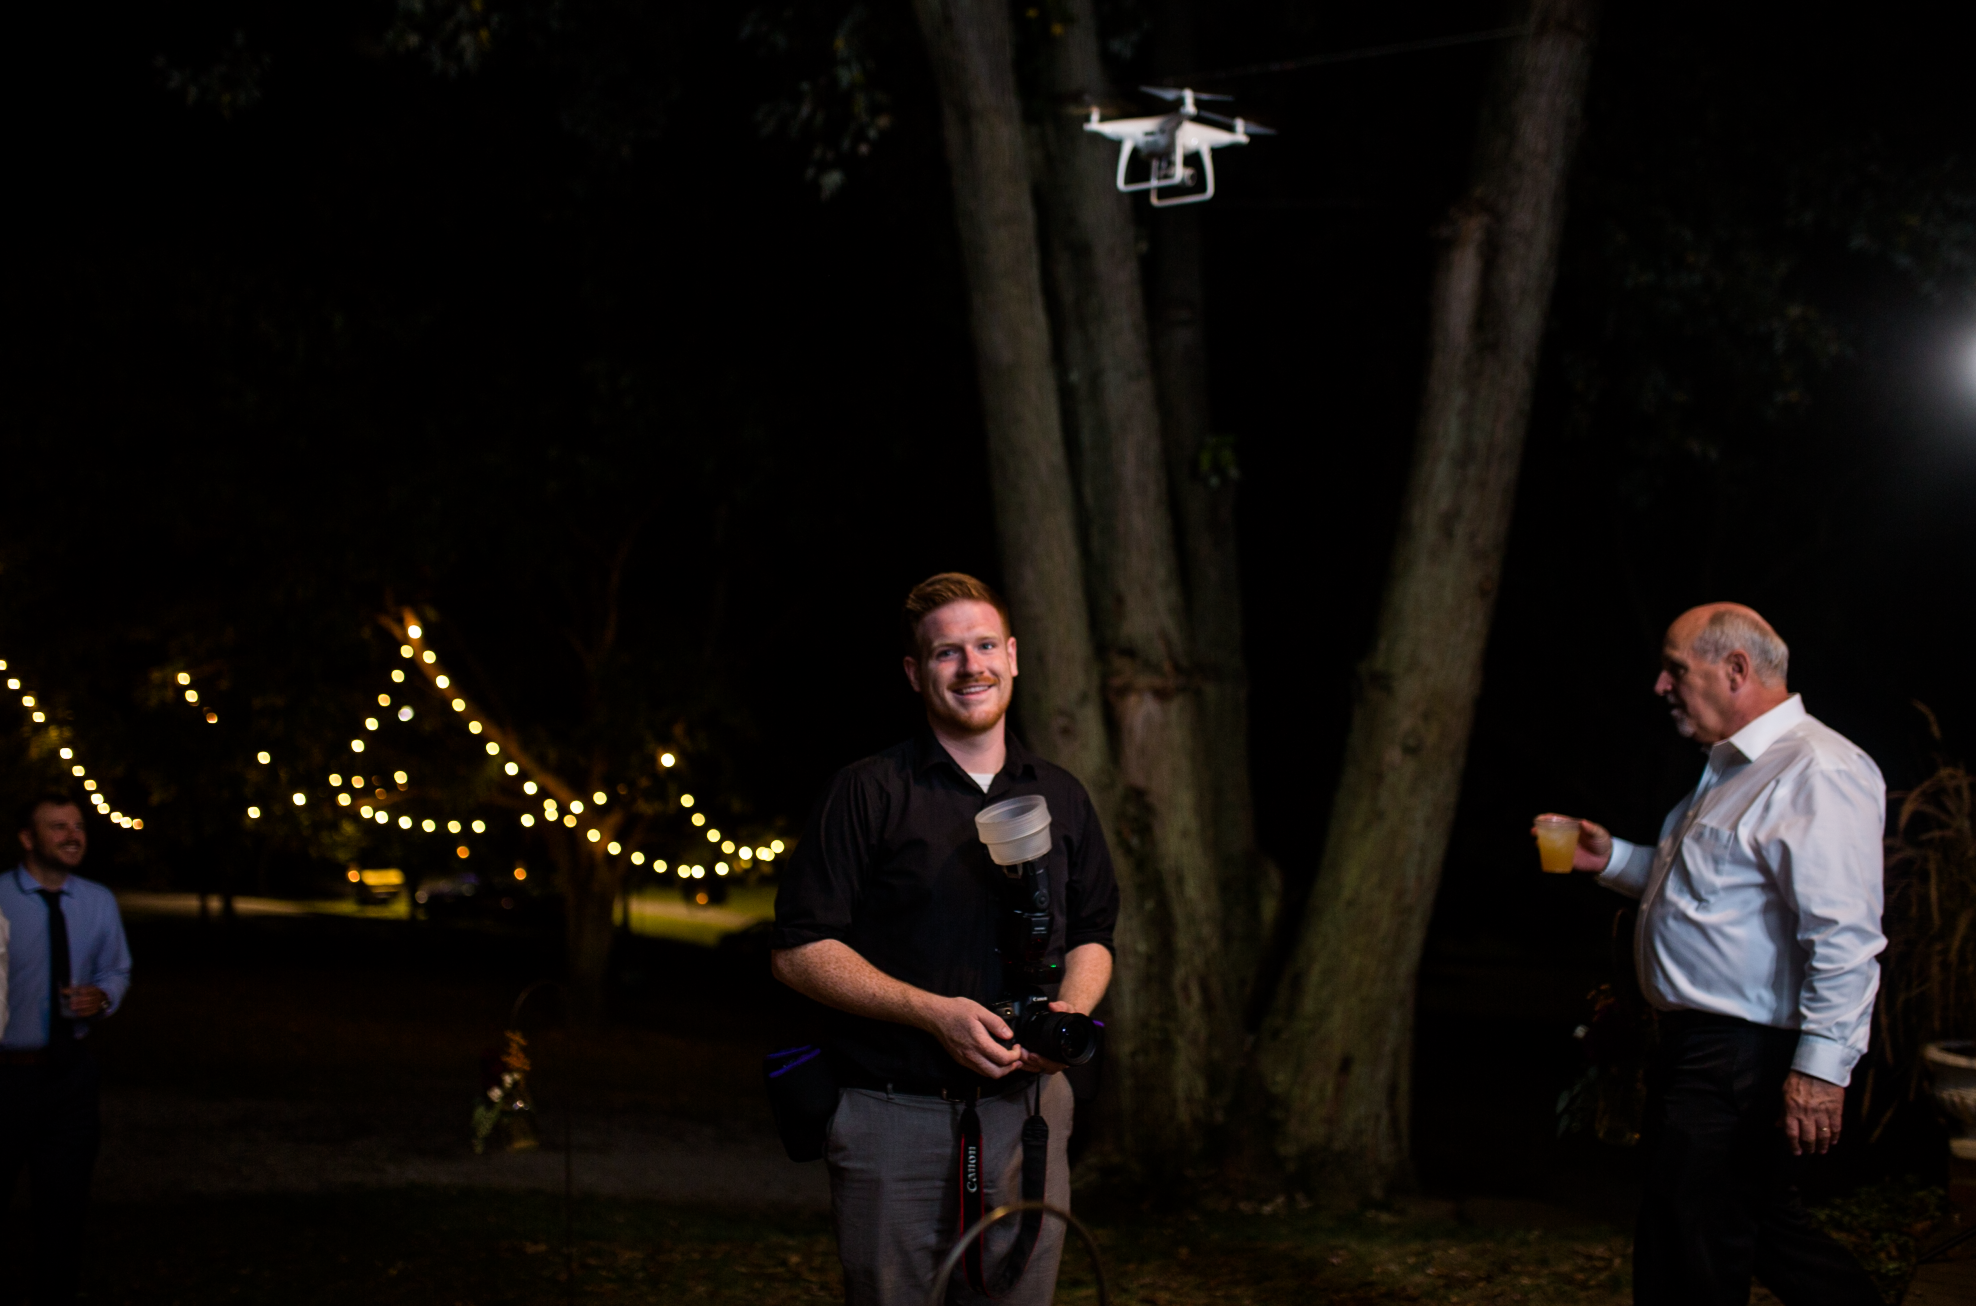 We were pretty pumped about this drone.